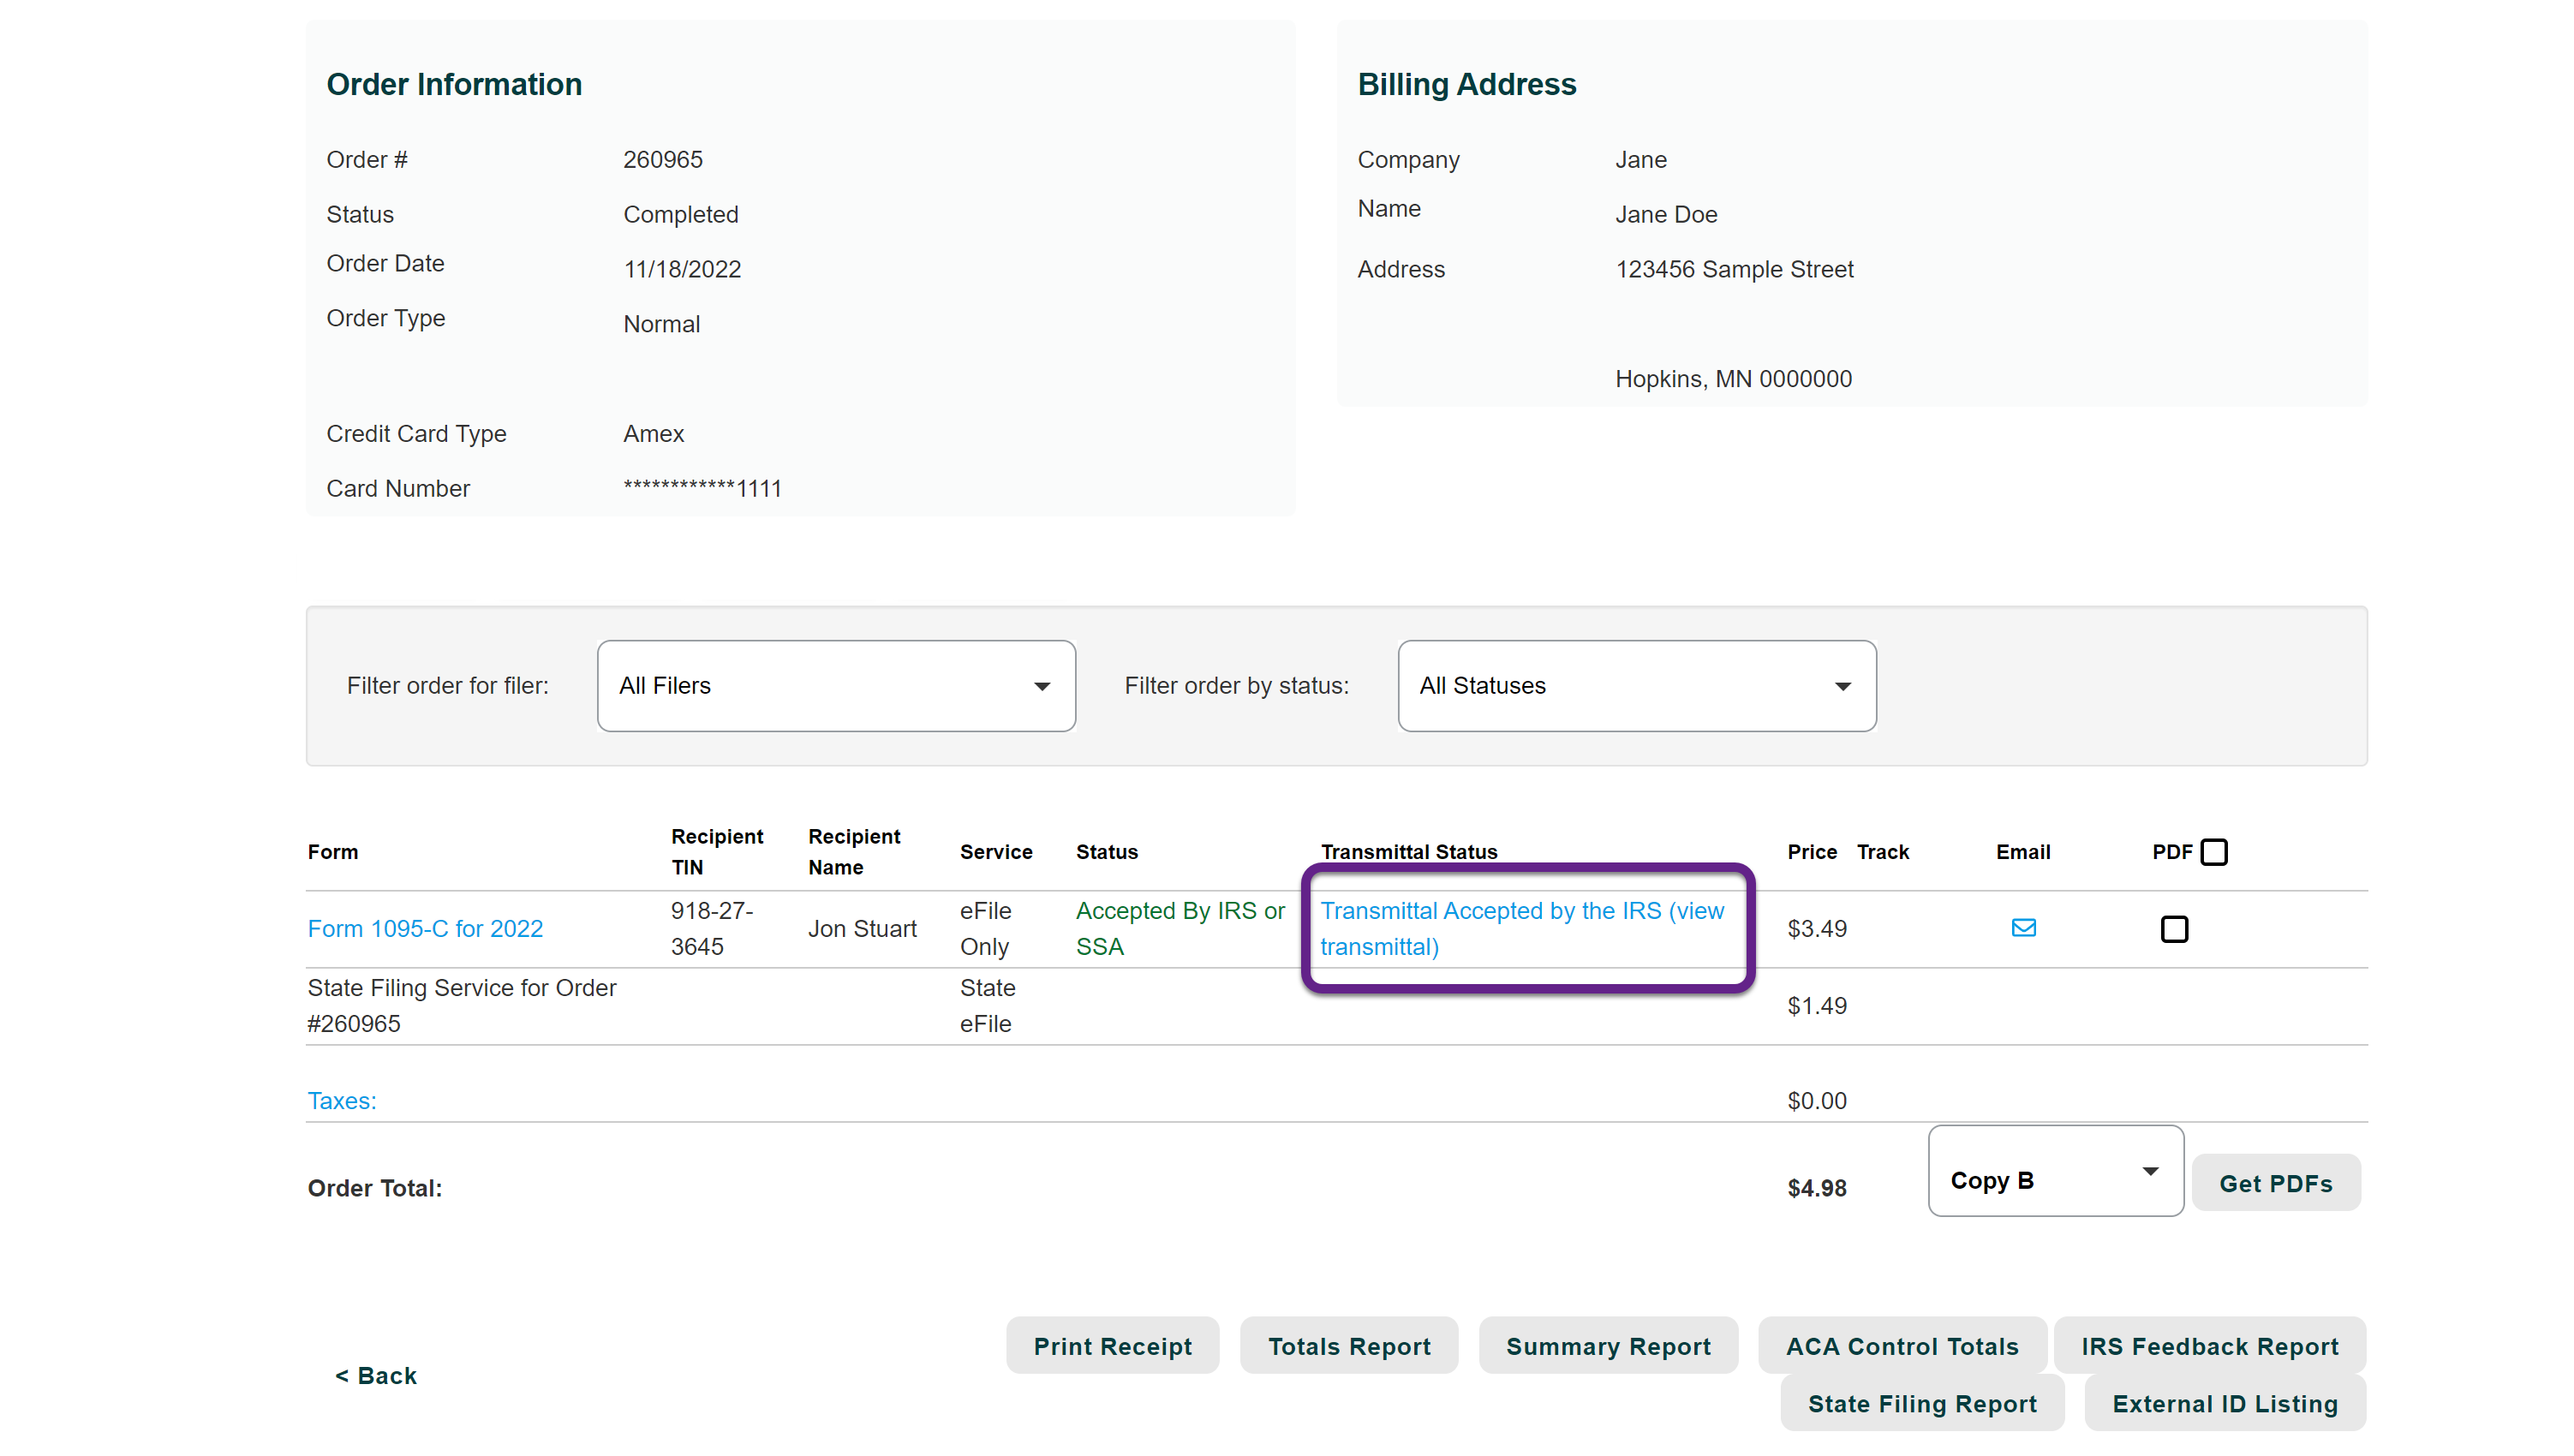 Image of the Order Details page with a callout on the transmittal status column.